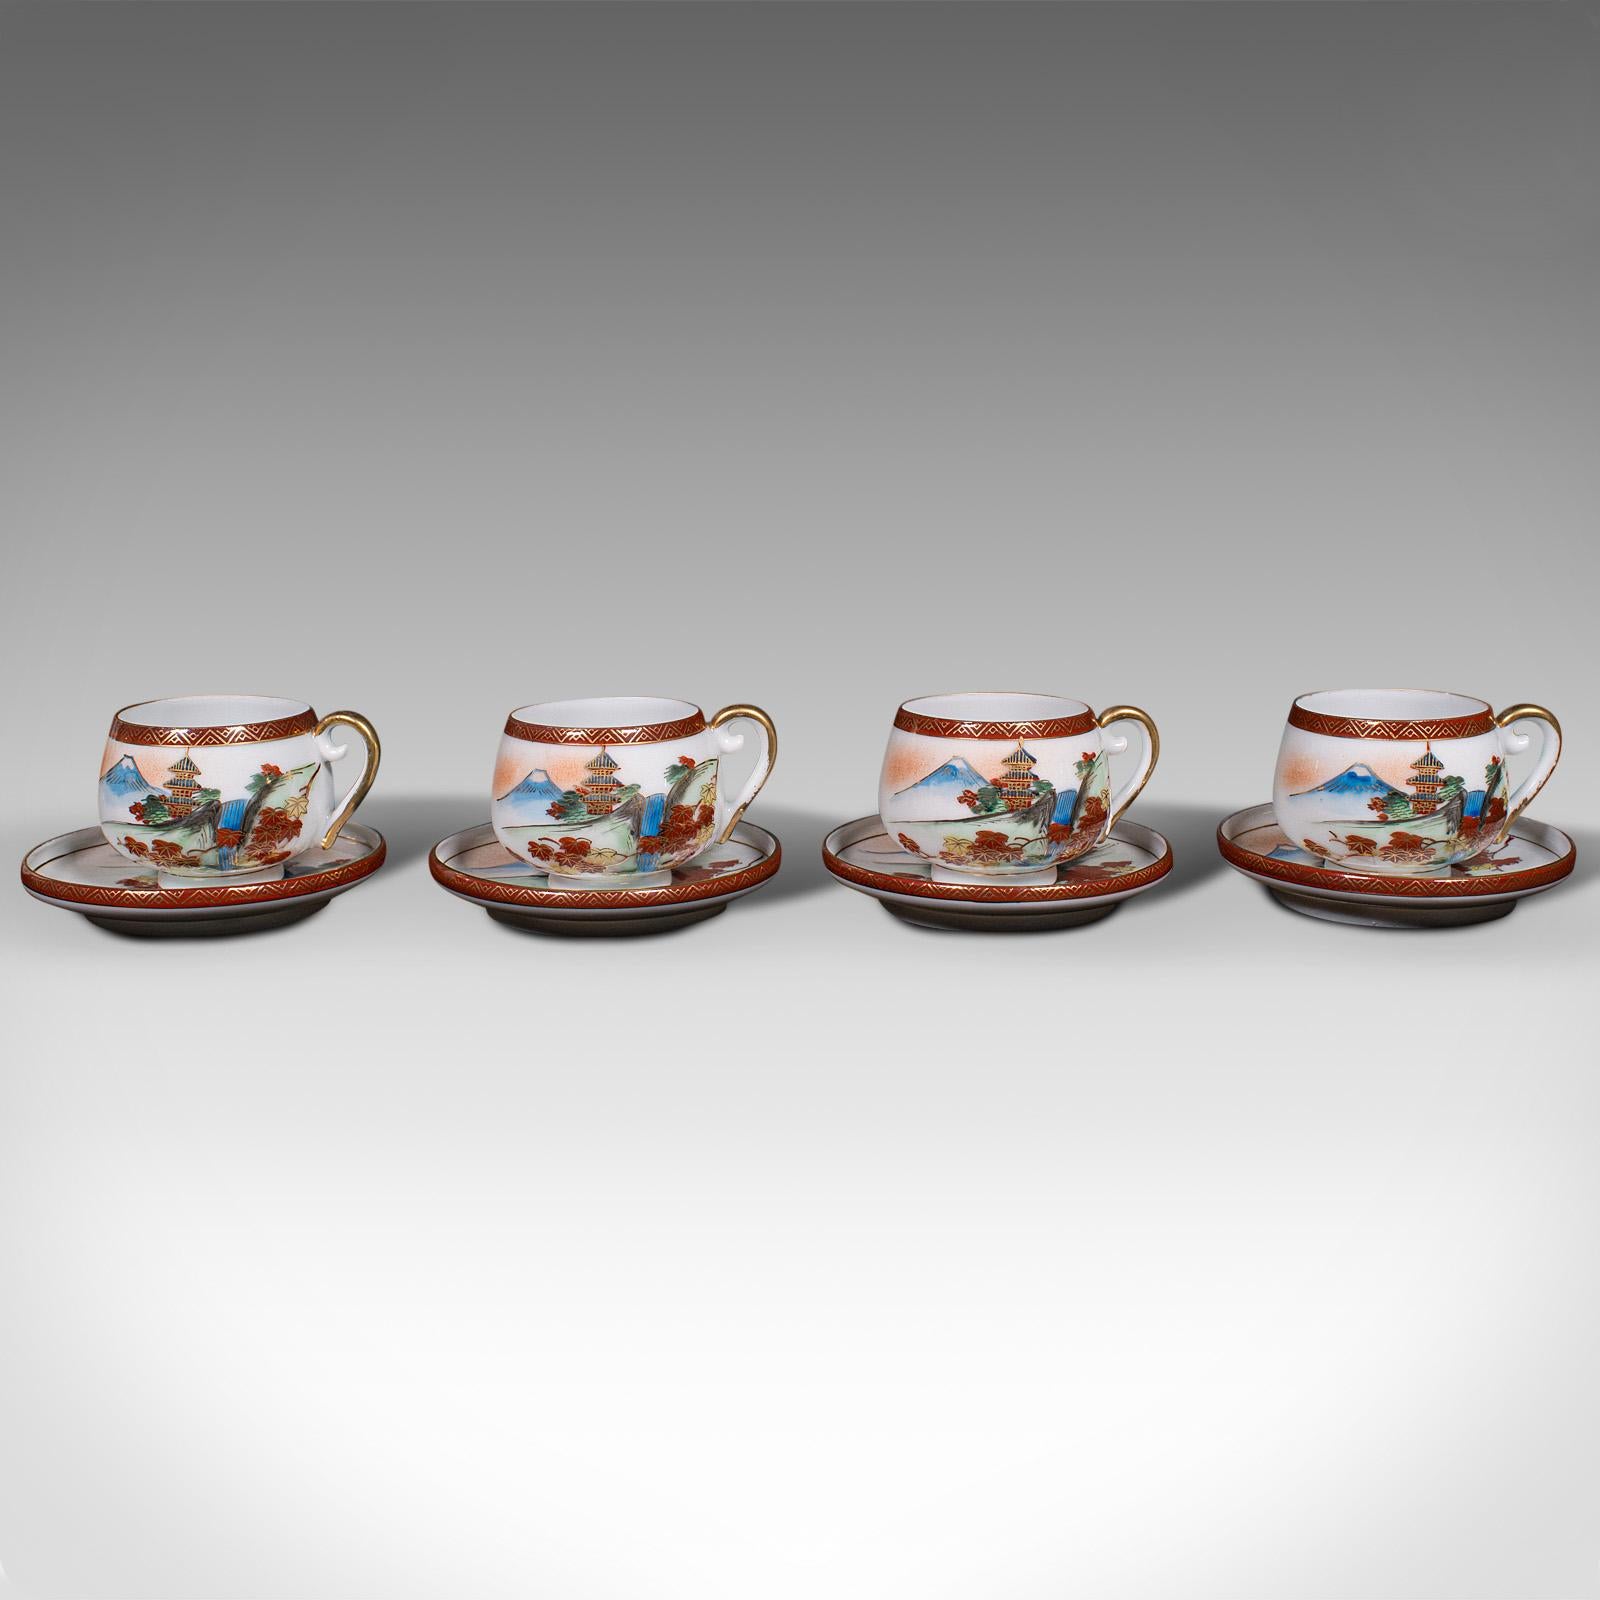 This is a vintage 4-person tea set. A Japanese, ceramic teapot and cups service in the manner of Arita ware, dating to the late Art Deco period, circa 1940.

Delightfully decorated tea set, with a charming landscape motif
Displaying a desirable aged